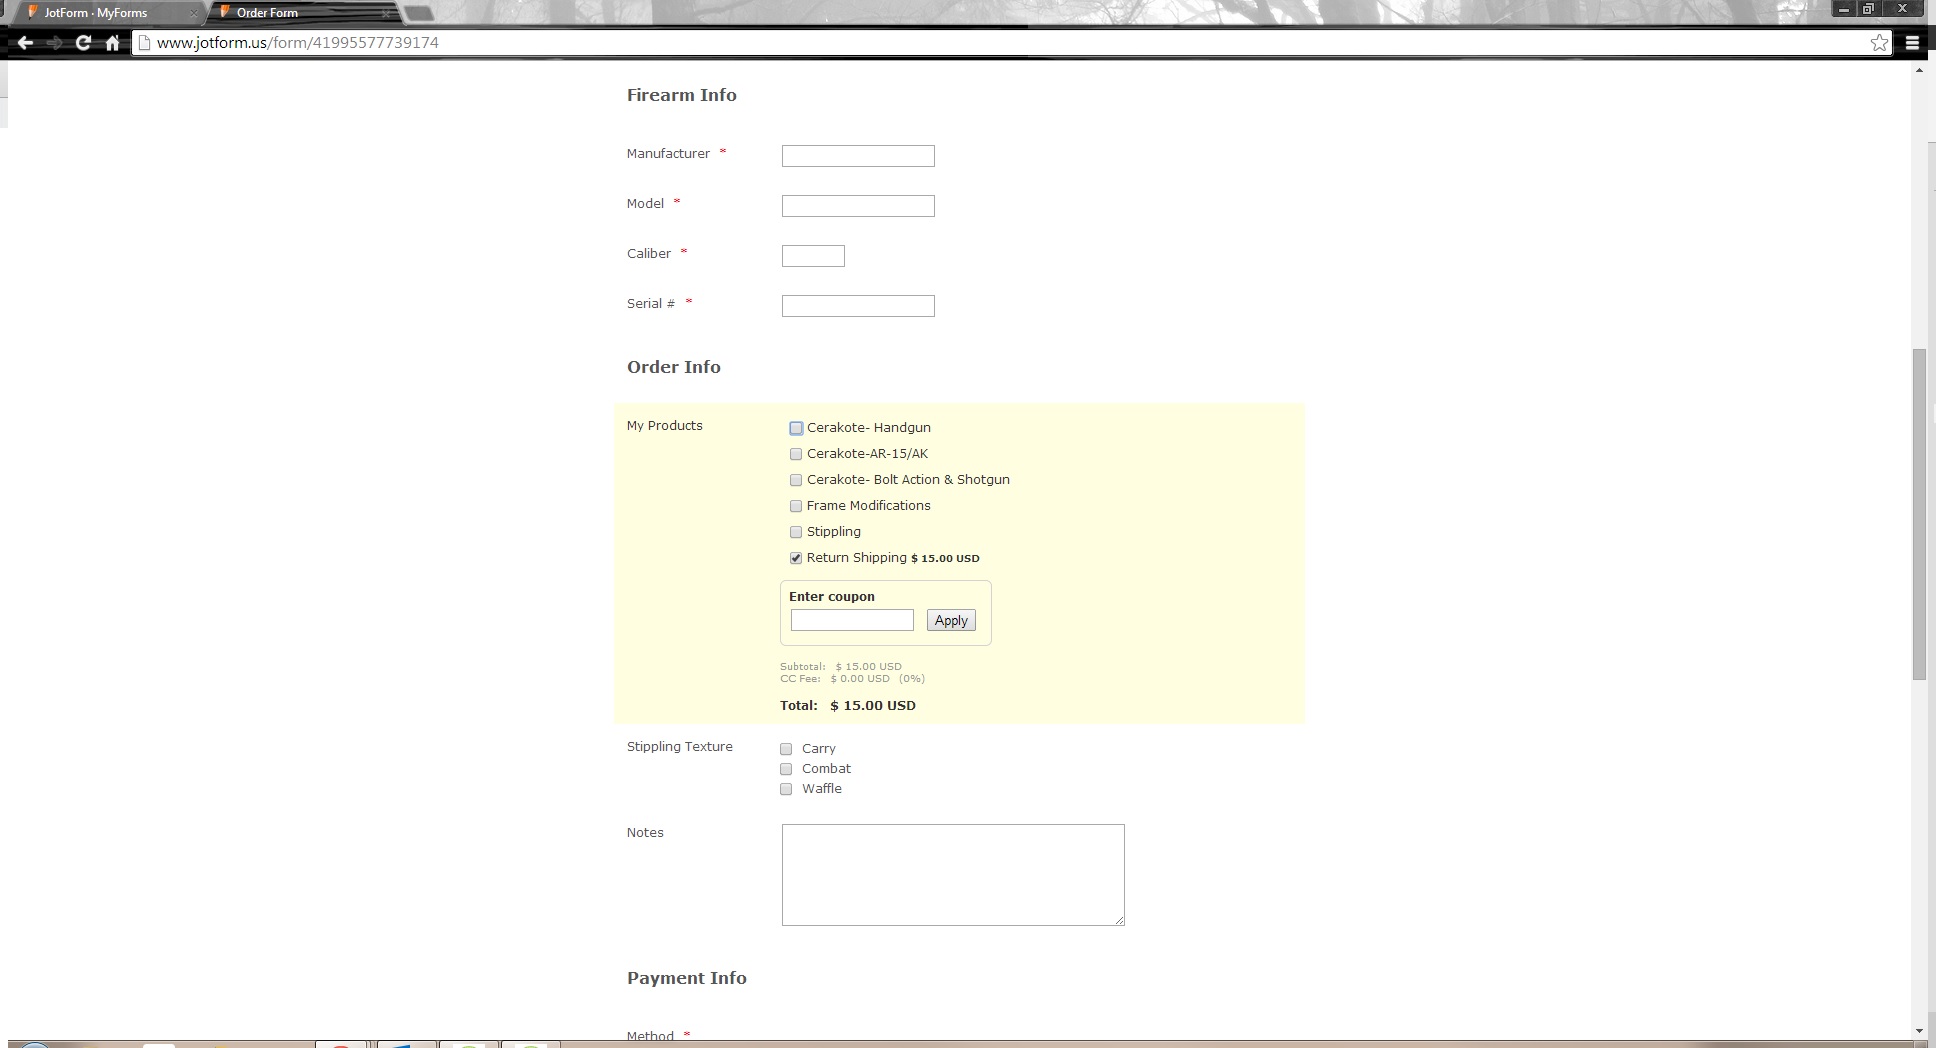 Cloning form causes purchase order format to corrupt Image 1 Screenshot 20